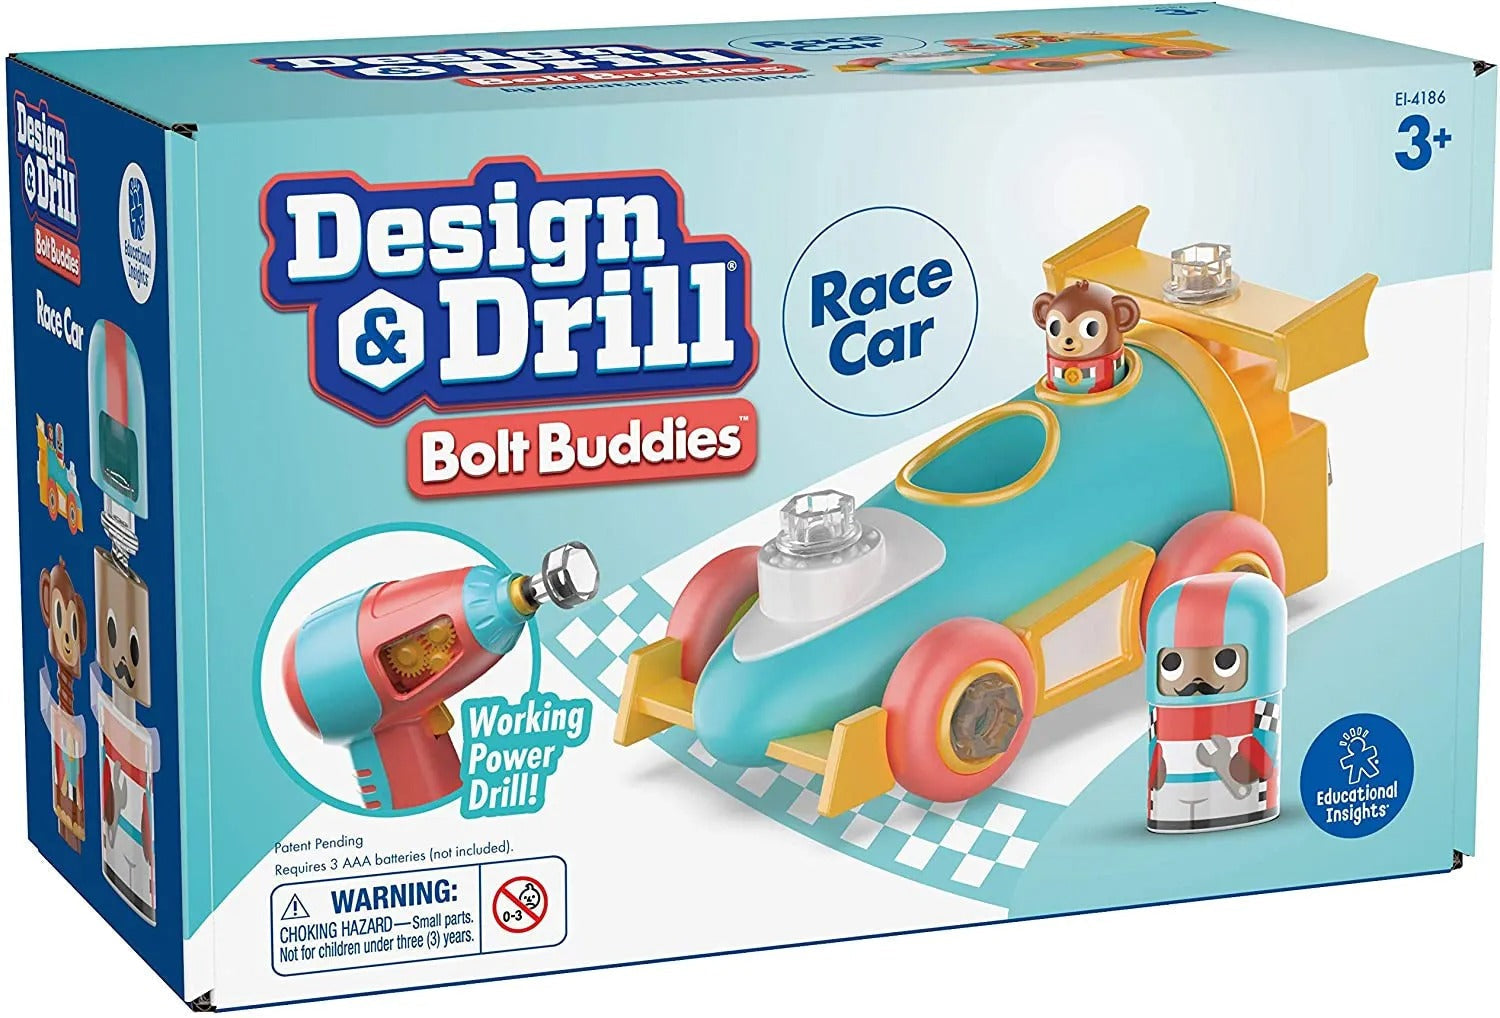 Design & Drill Bolt Buddies Race Car, Zoom off to drilling fun with Design & Drill Bolt Buddies® Race Car toy. Use the real-working drill to build your own race car and add the Race Car Driver Buddy to the driver’s seat for a thrilling drilling race to the finish line. Pull into the pit stop and get drilling. Plus, the box converts into a reusable playset! Turn it inside out for your own racetrack stadium.. This race car construction set is ideal for pre-schoolers fascinated with racing and construction. Sn